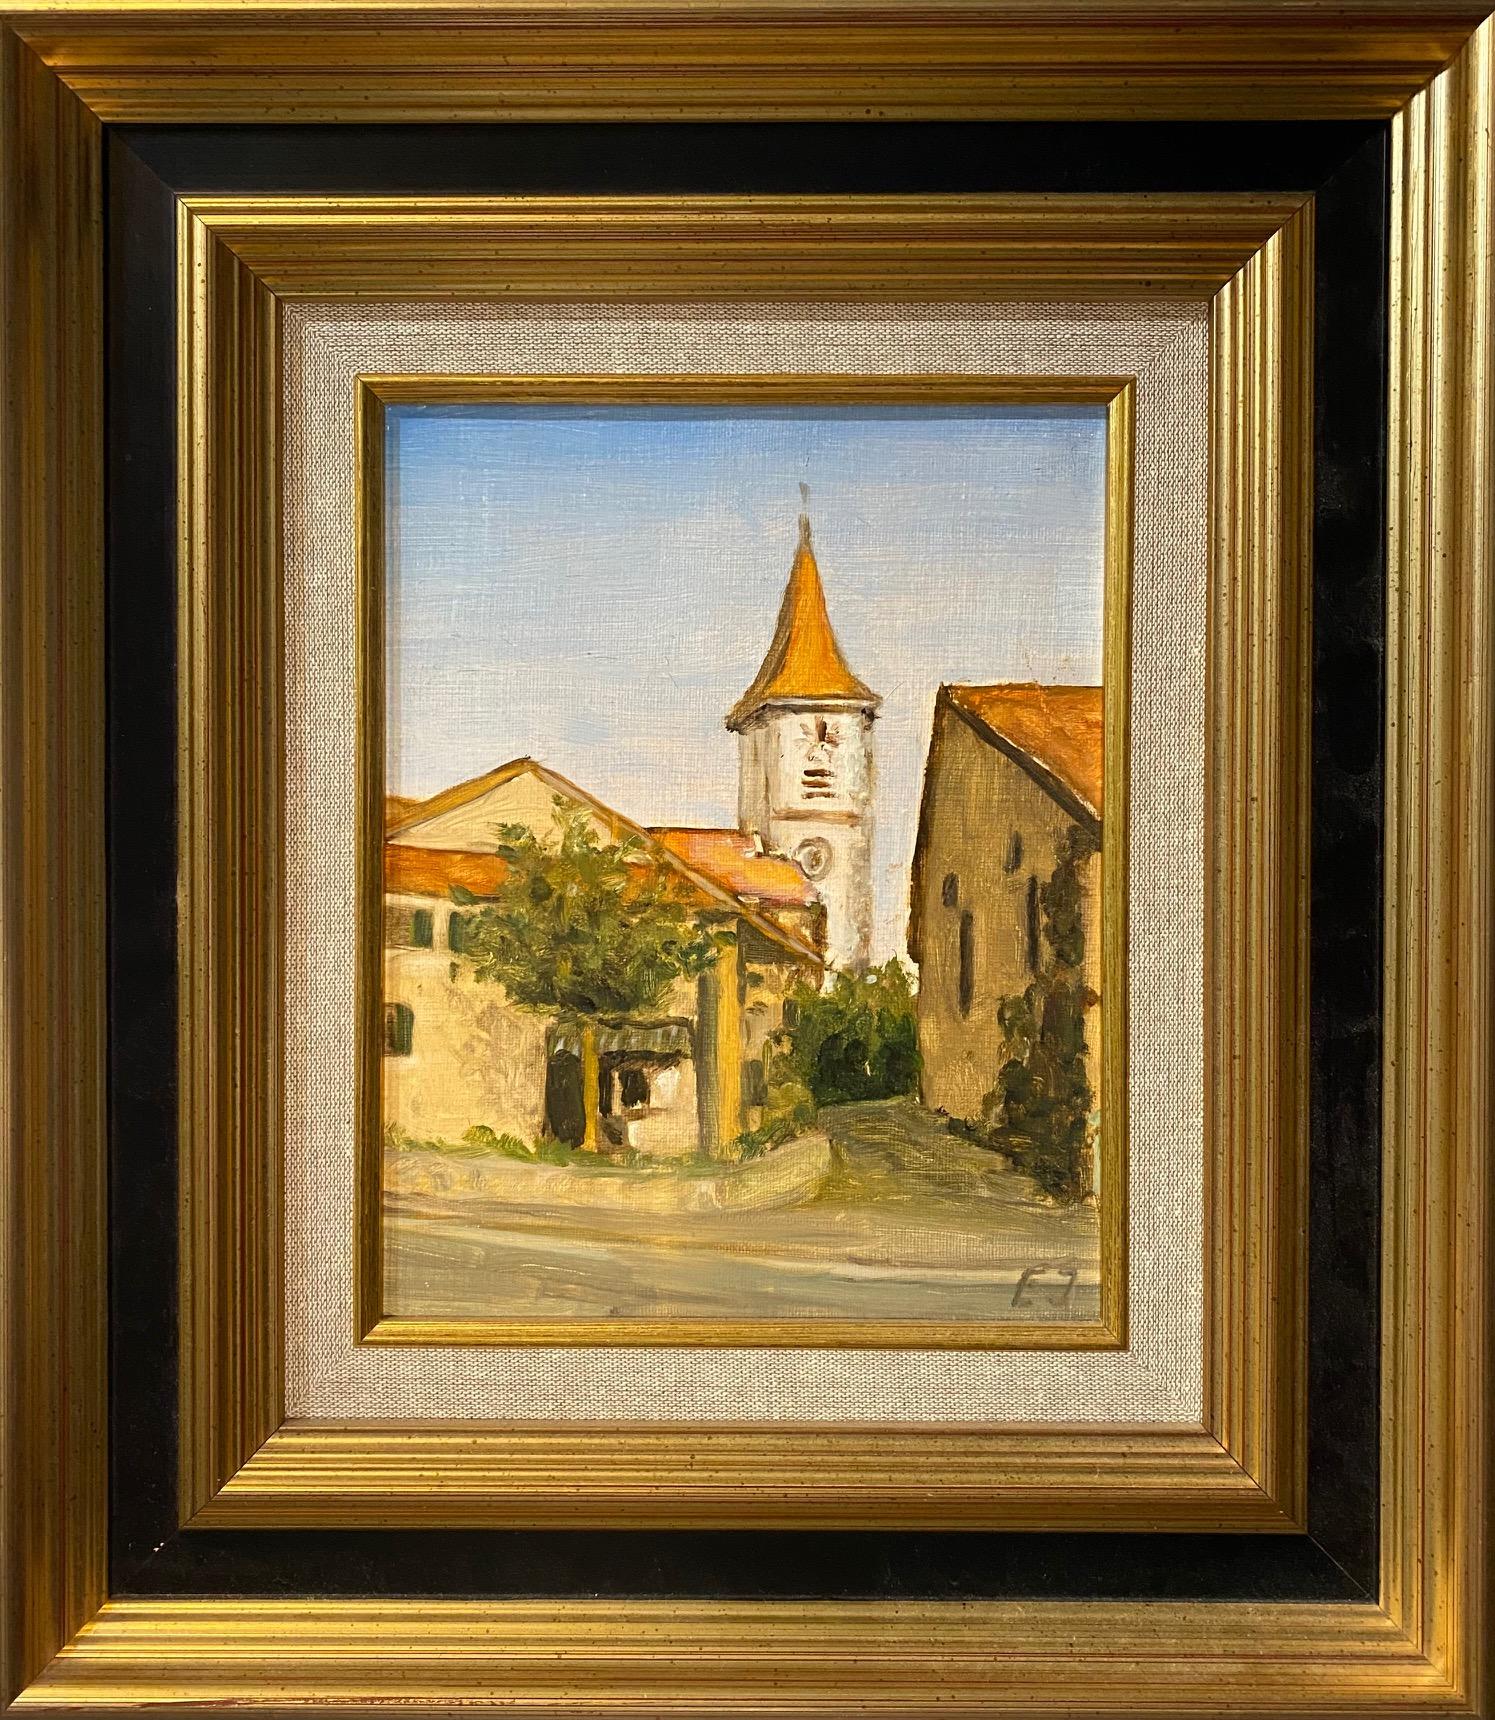 Oil on canvas sold with frame 
Total size with frame 36x40 cm 

Born in Vernier near Geneva in 1928, Eric Jeandupeux had a low voice and high words. With his strong character, he plunged into life and into discussions, taking on great challenges.